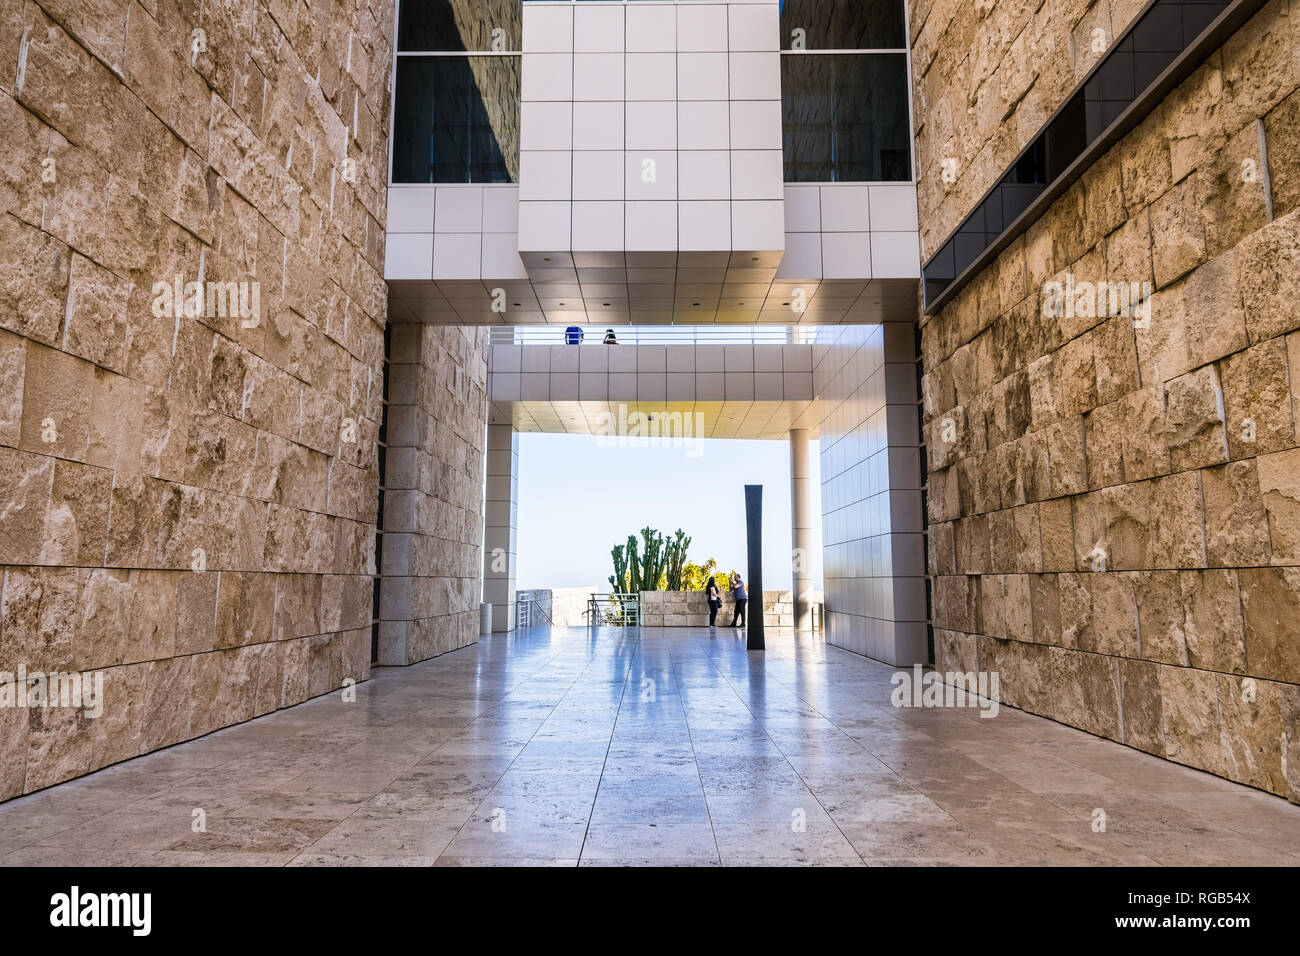 June 8, 2018 Los Angeles / CA / USA - Walking corridor between travertine covered walls and below an aerial walkway connecting buildings at the Getty  Stock Photo